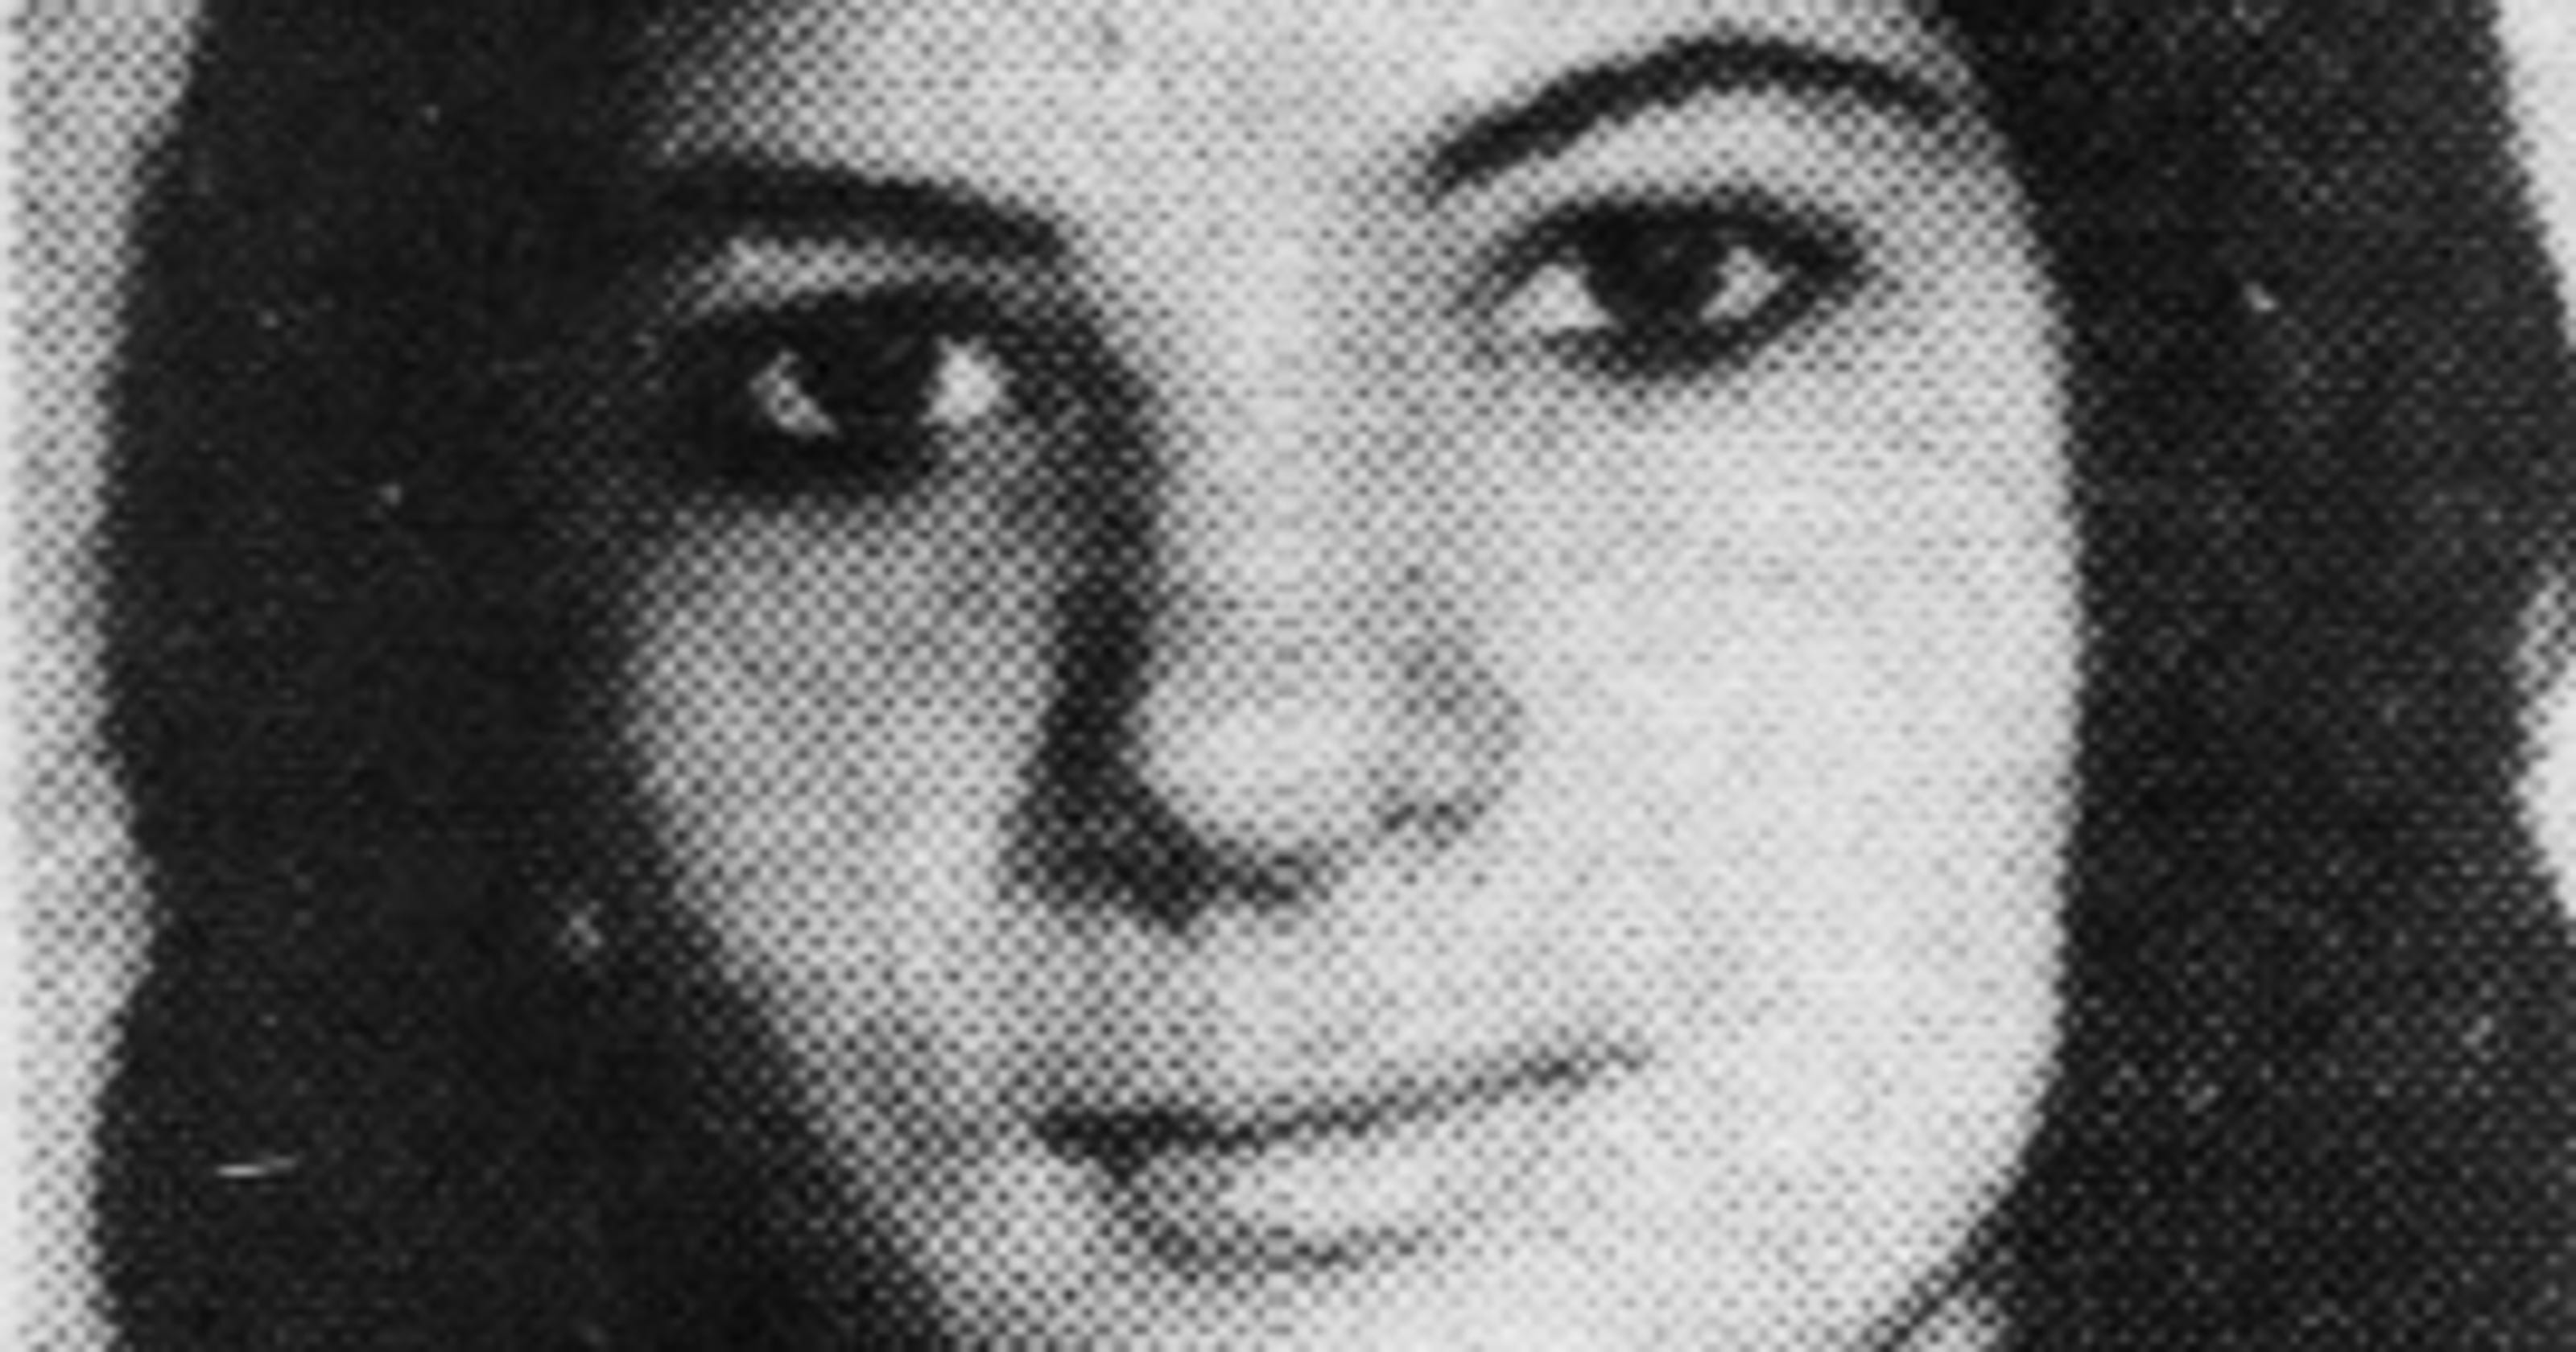 Nj Cold Case What Happened To Jeannette Depalma Teen Found Dead In 1972